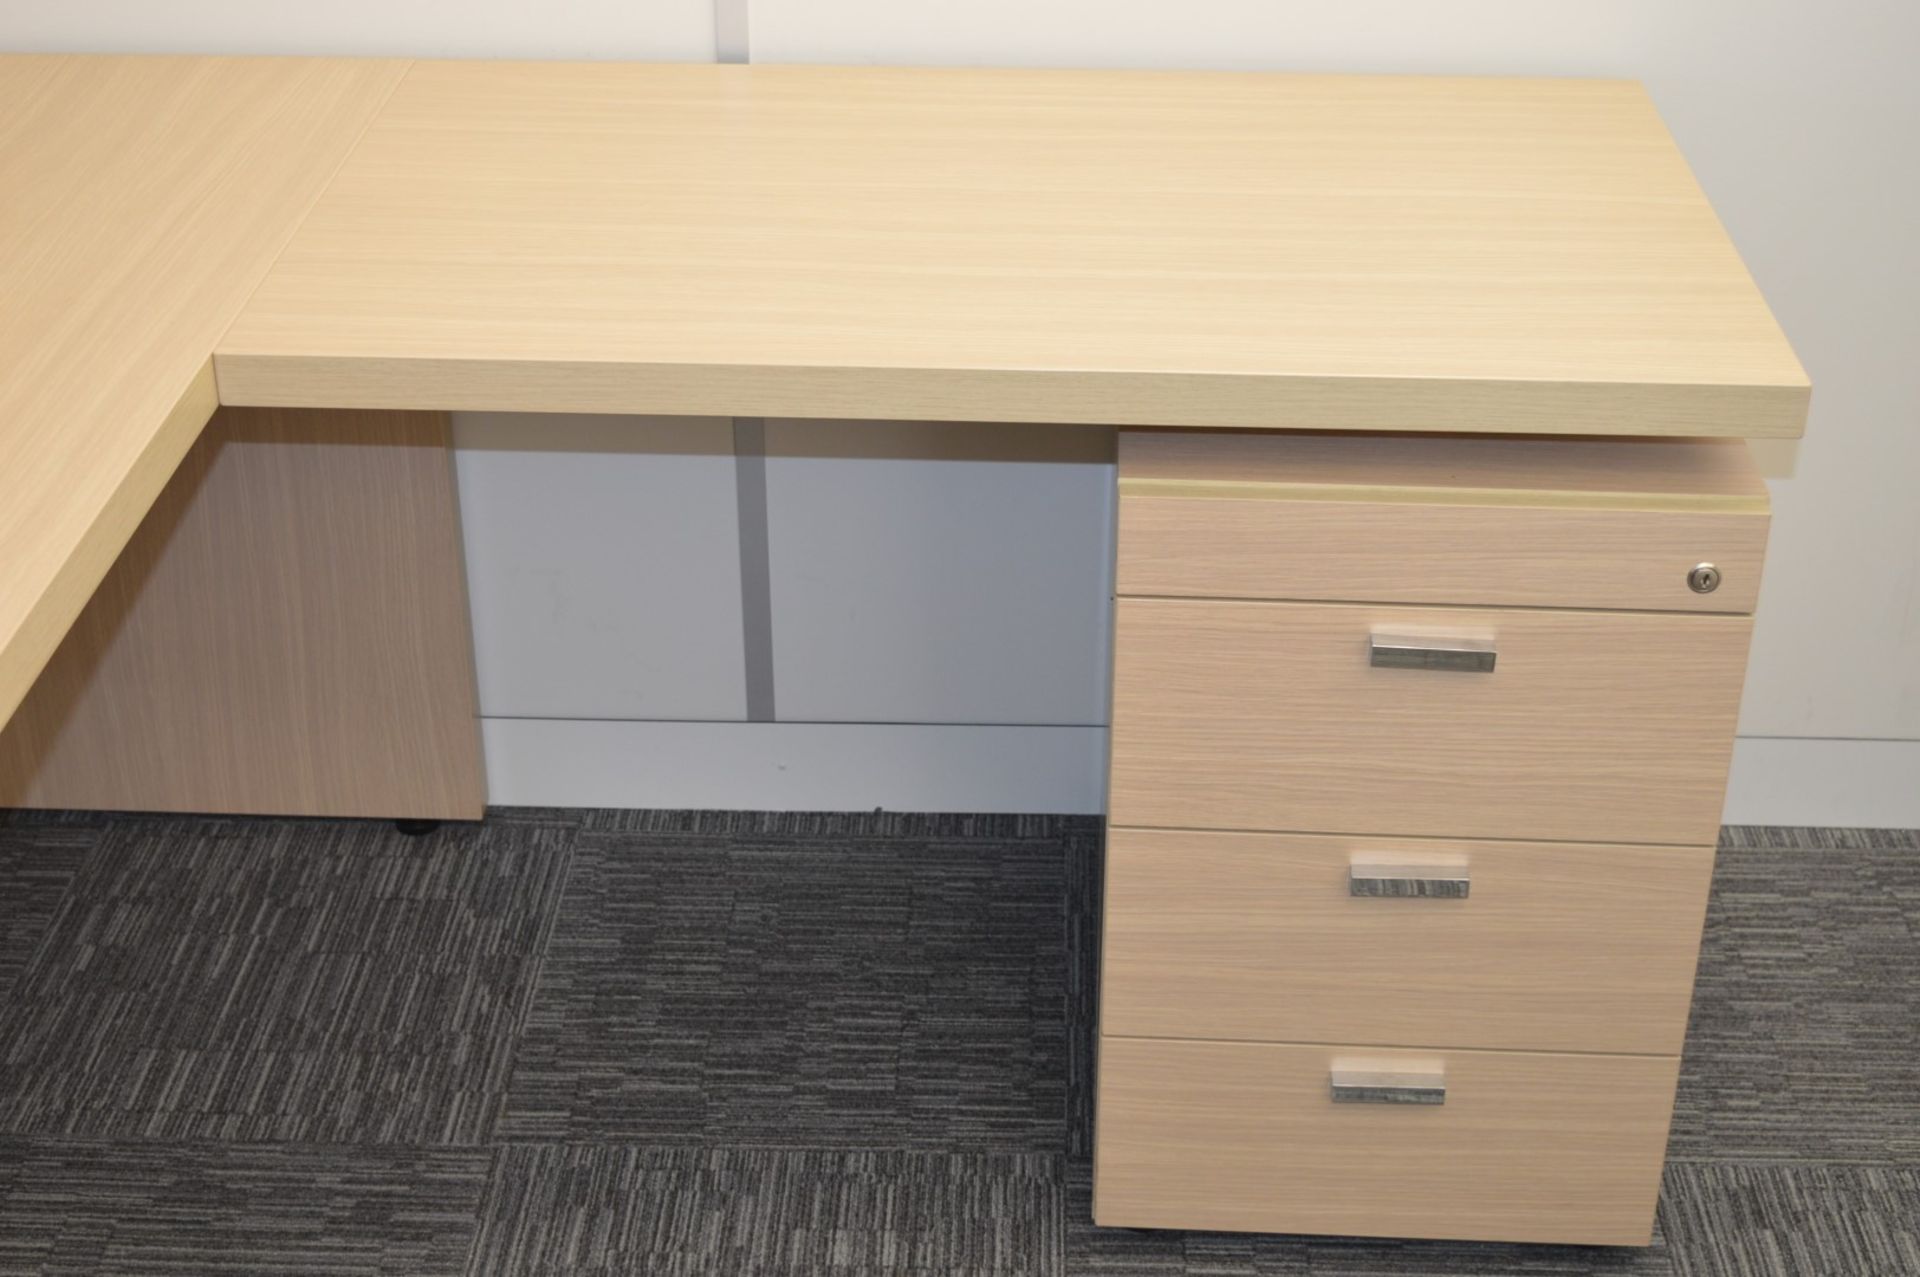 1 x Babini Executives Office Desk With Three Drawer Pedestal and Side Table - Attractive Finish With - Image 3 of 9